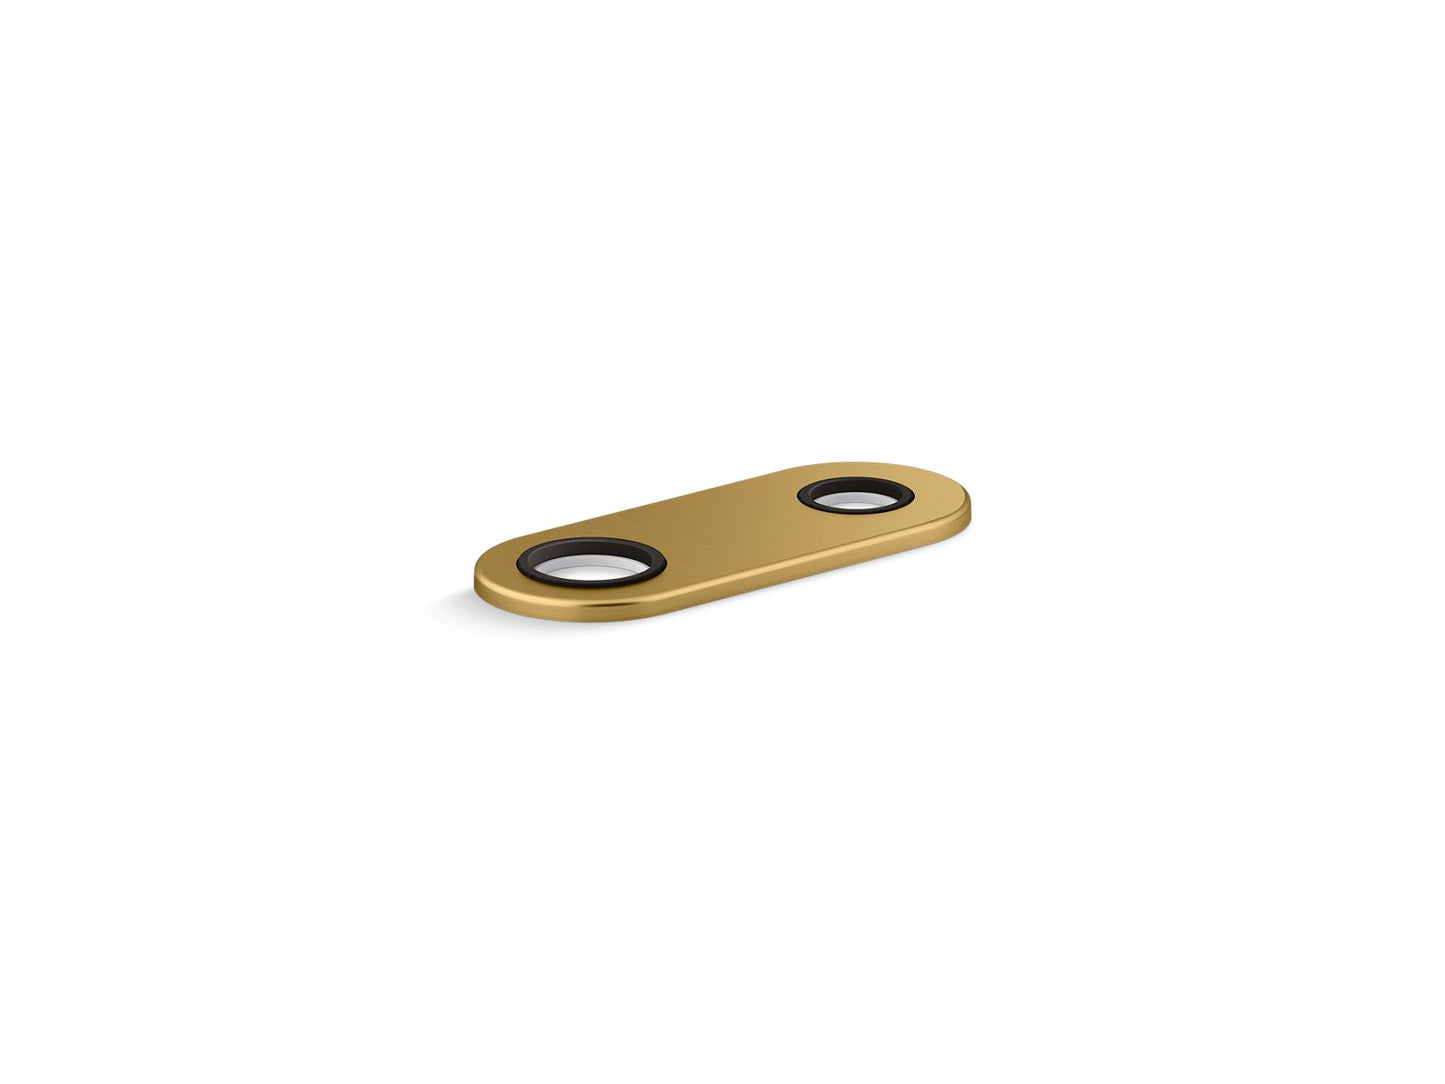 KOHLER K-38169-2MB 4" Two-Hole Escutcheon Plate For Insight And Kinesis Lavatory Faucets And Soap Dispensers In Vibrant Brushed Moderne Brass